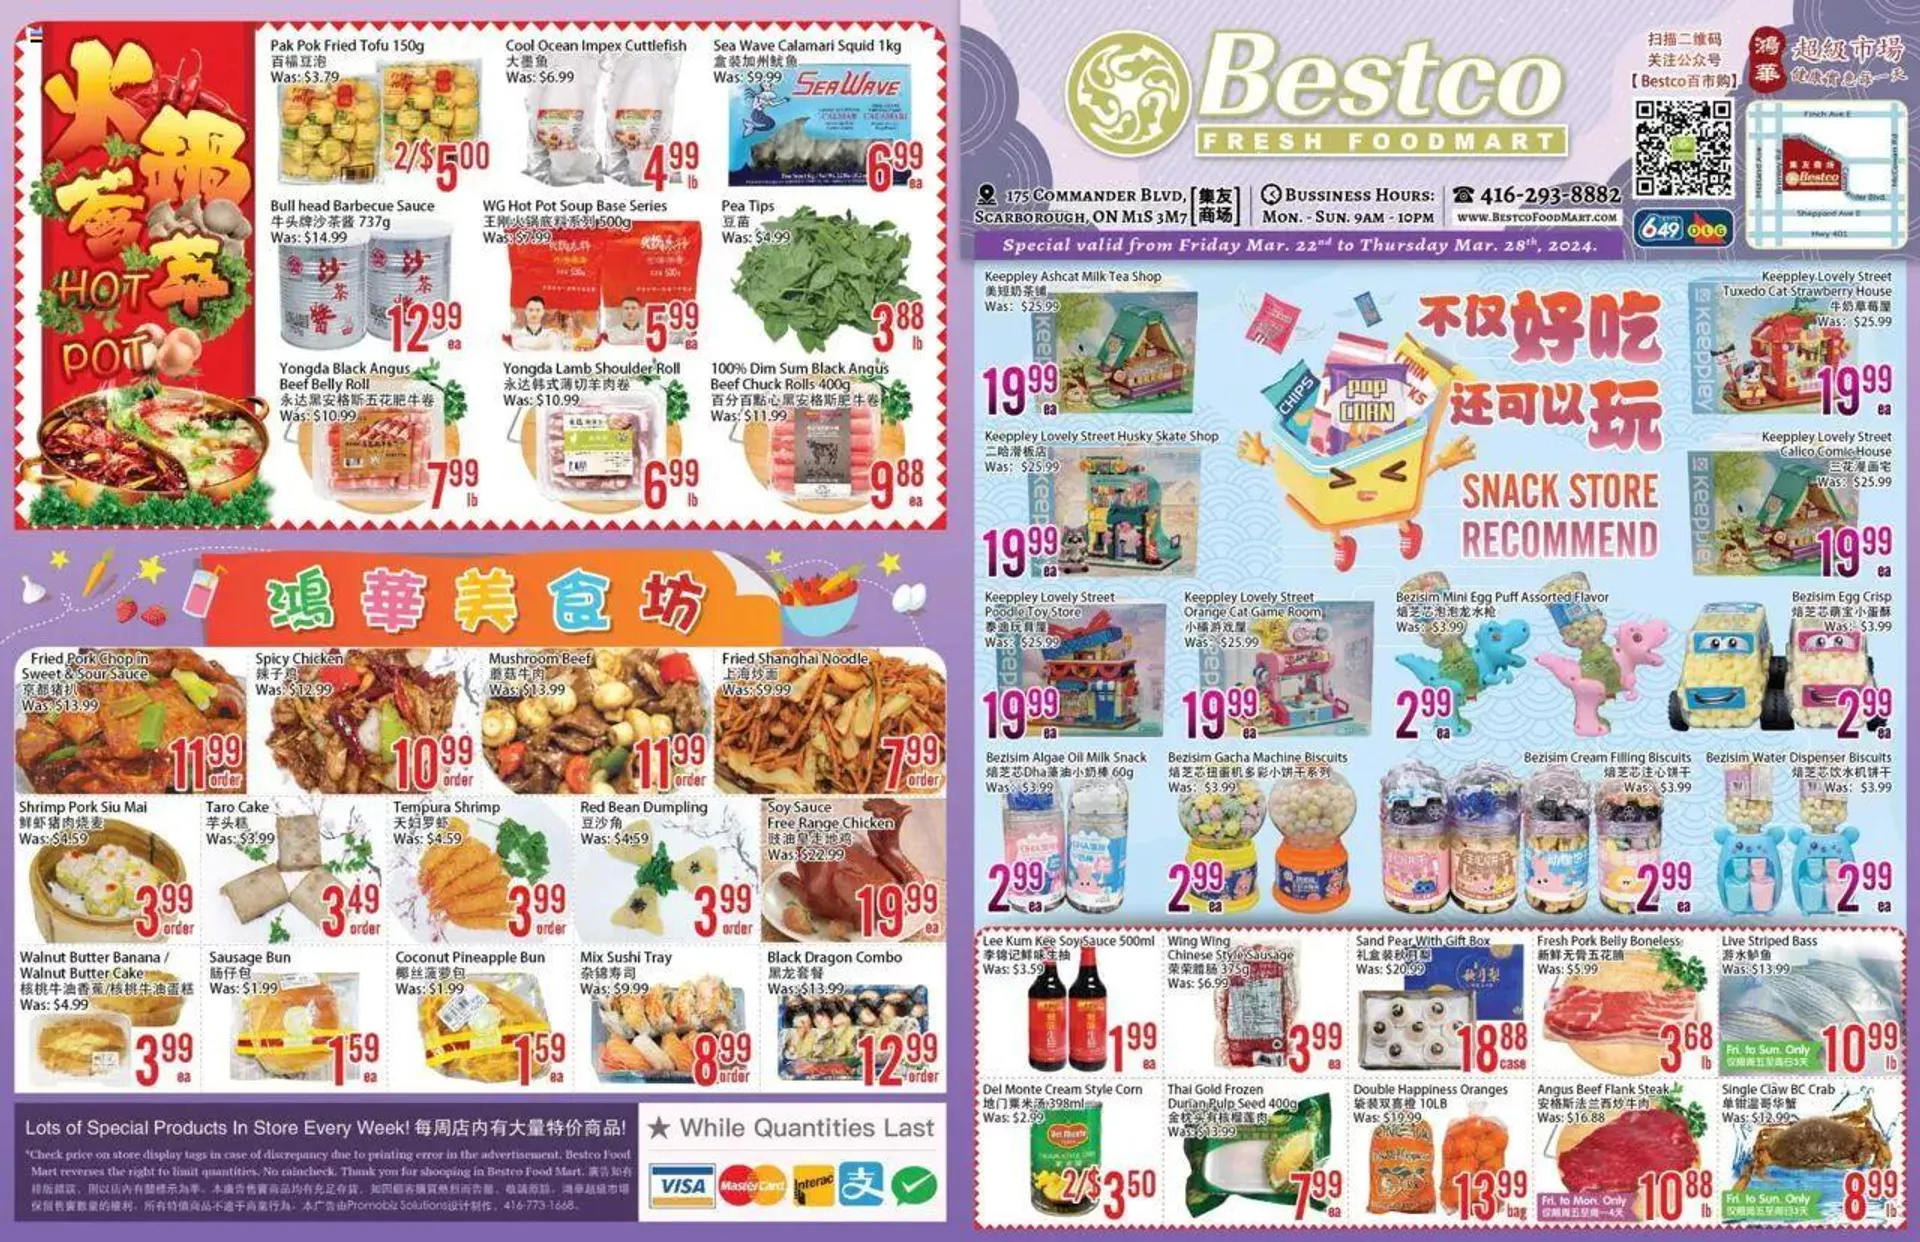 Bestco Foodmart weekly flyer / circulaire from March 22 to March 28 2024 - flyer page 1